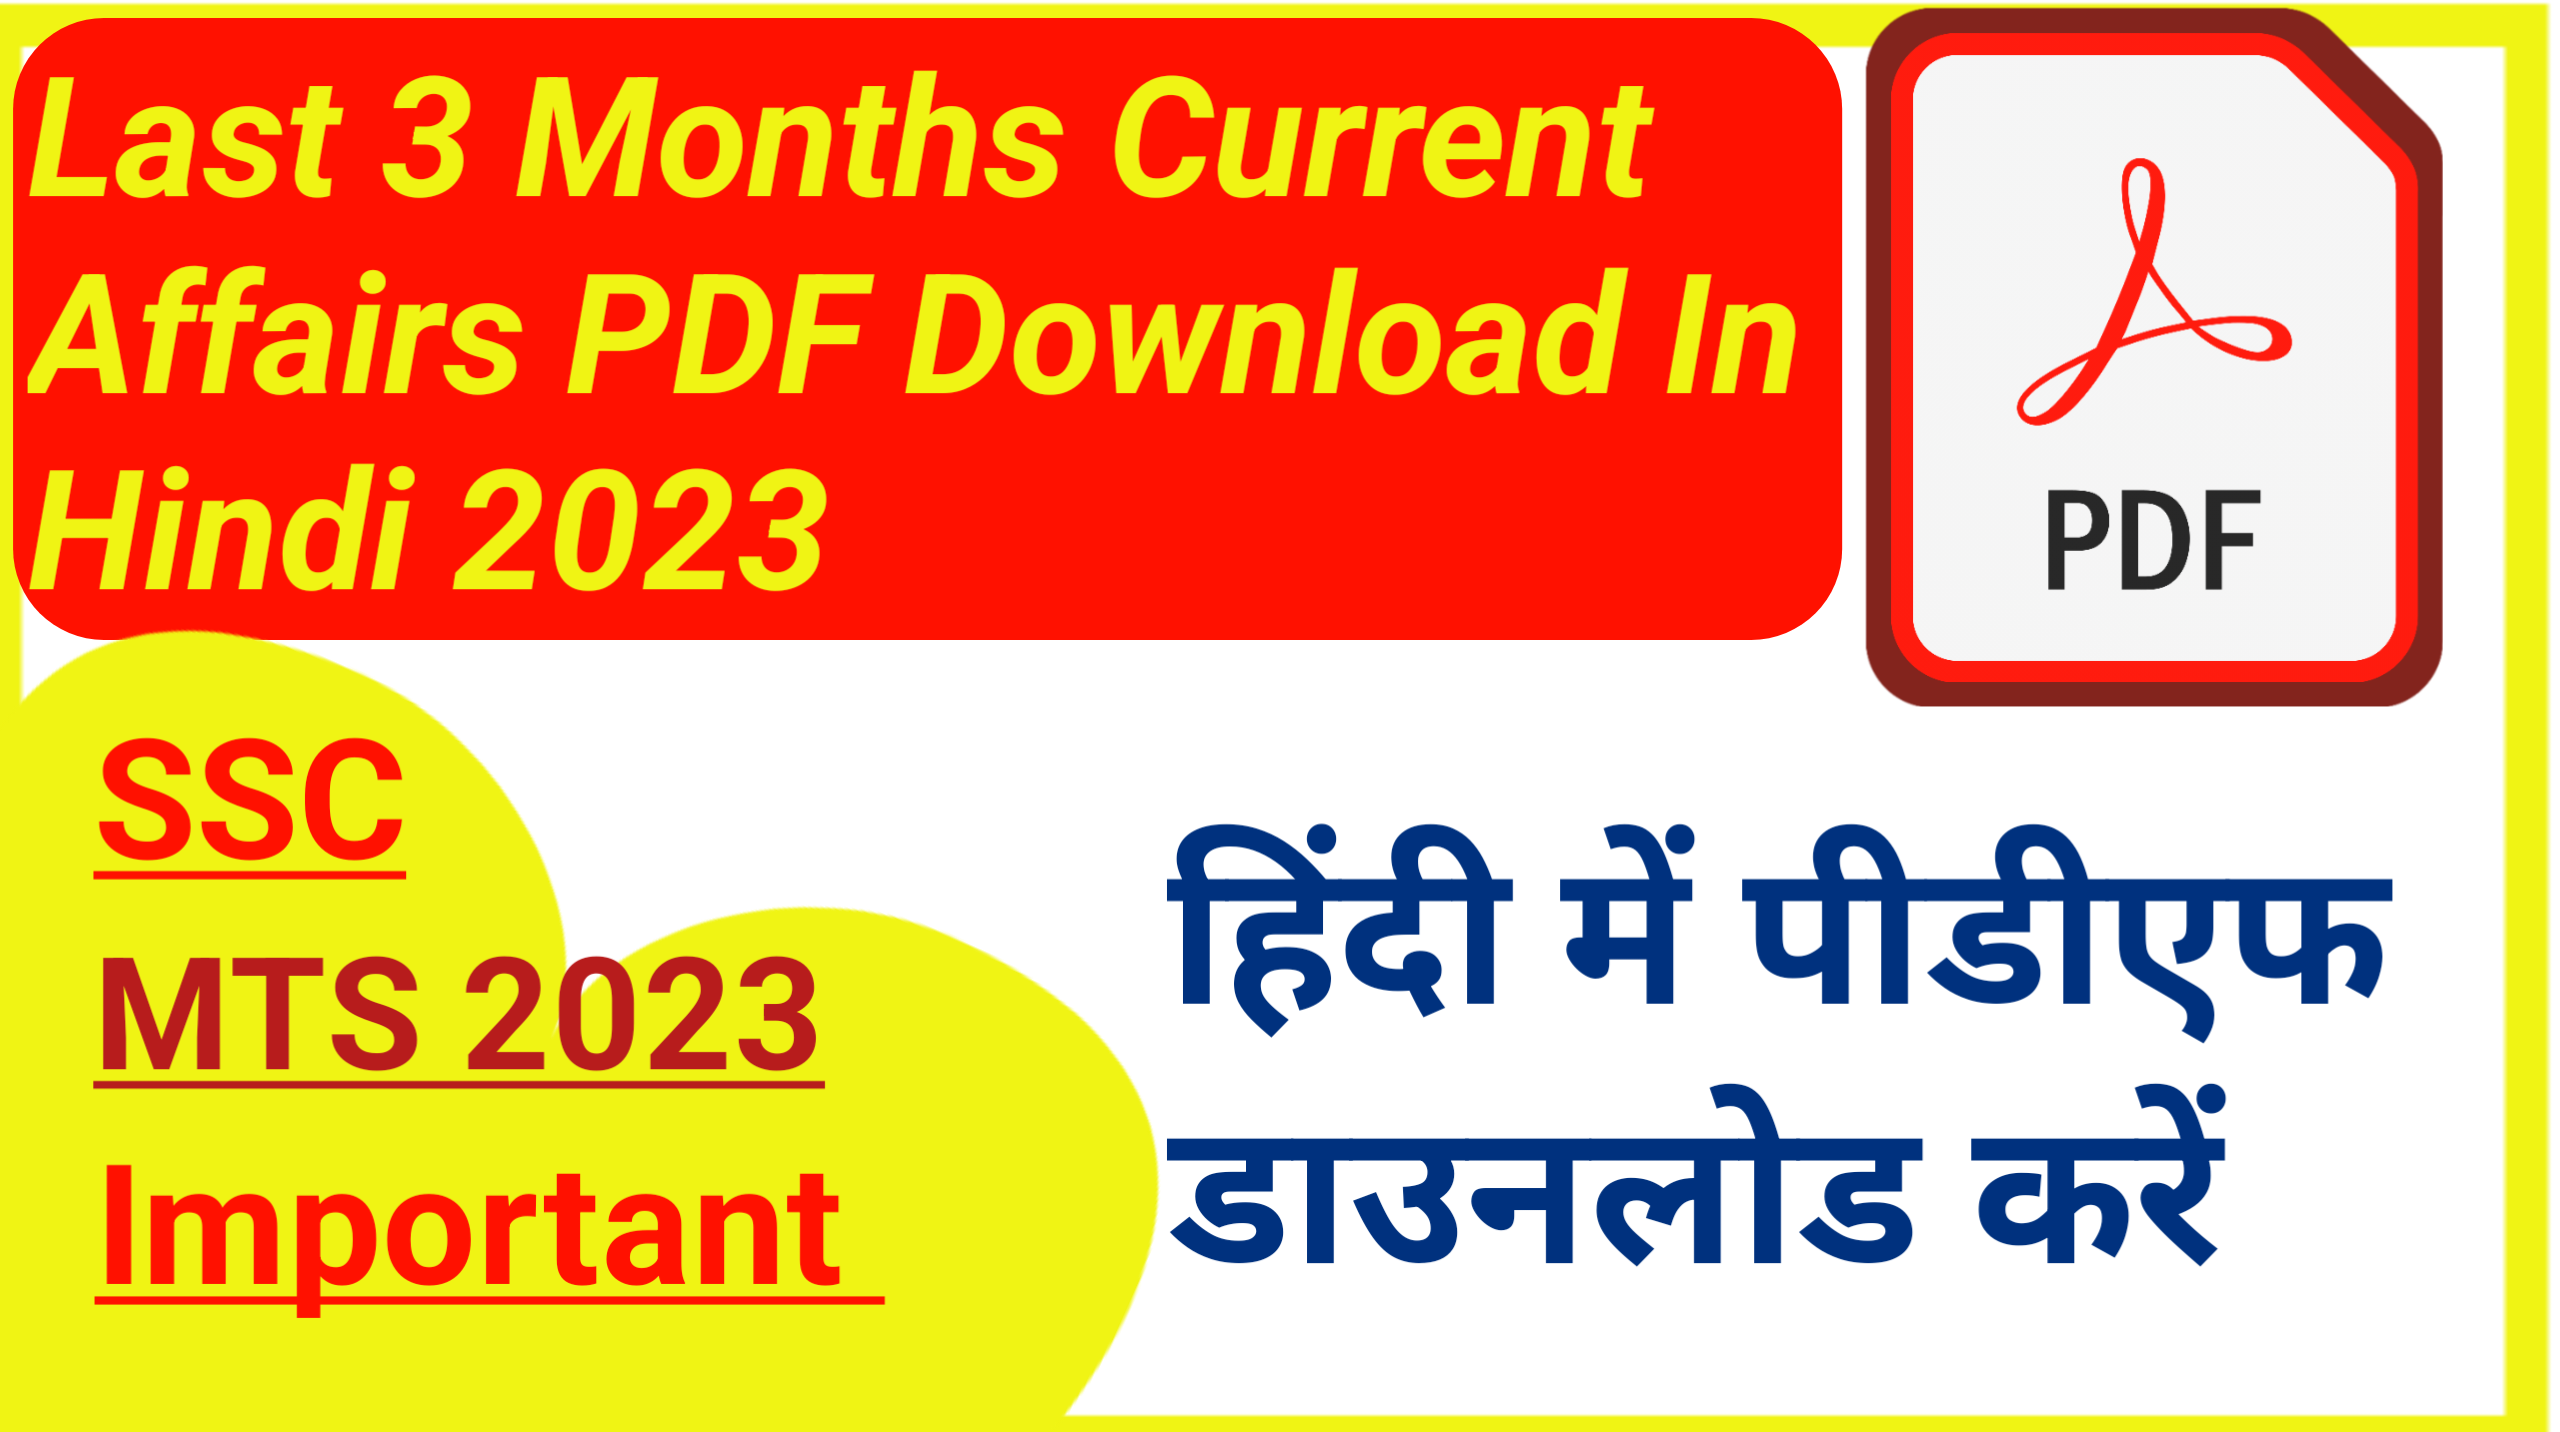 Last 3 Month Current Affairs PDF Download In Hindi 2023